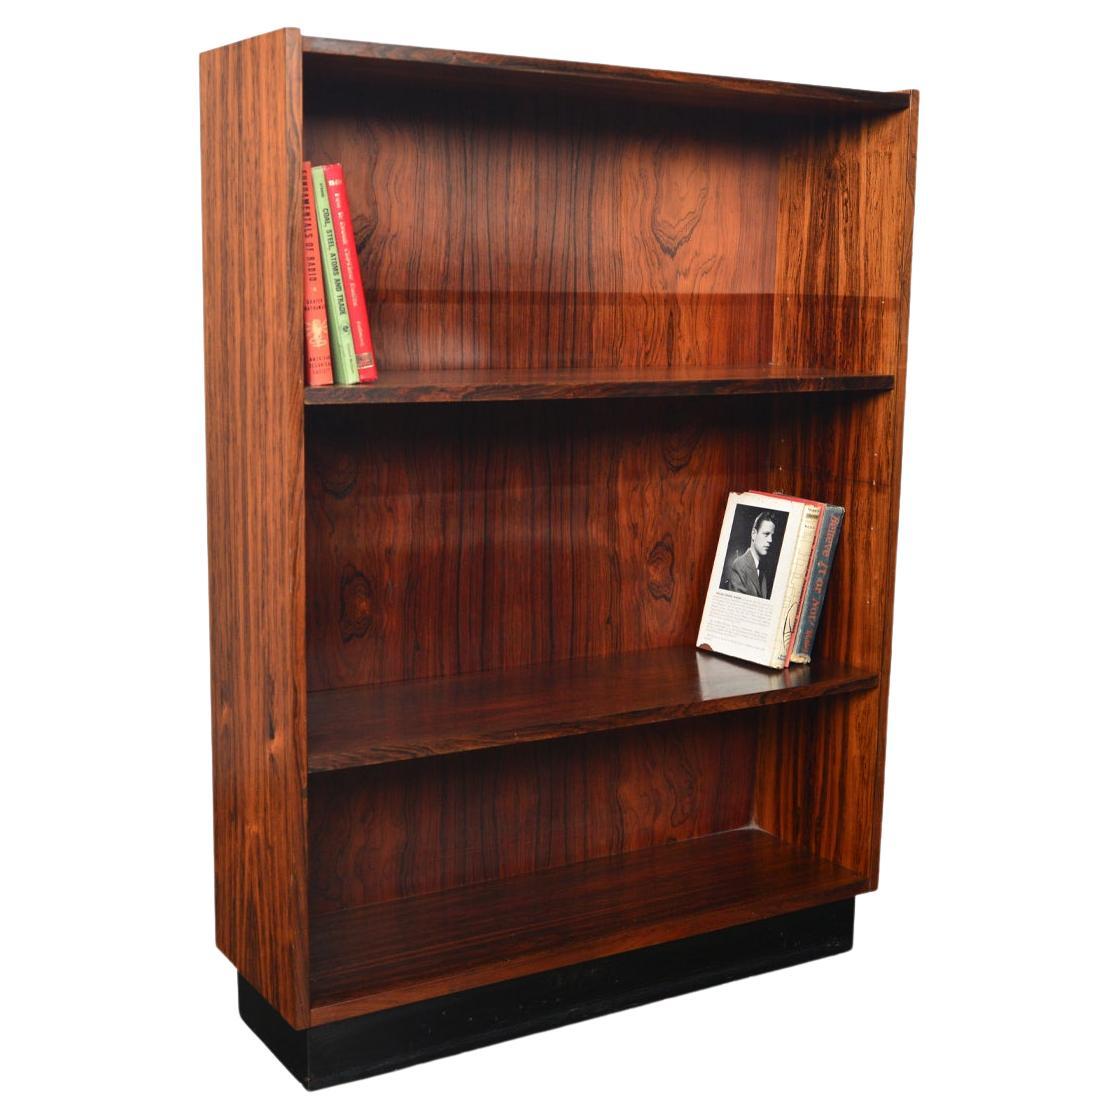 Narrow Danish Modern Bookcase in Rosewood with Plinth Base